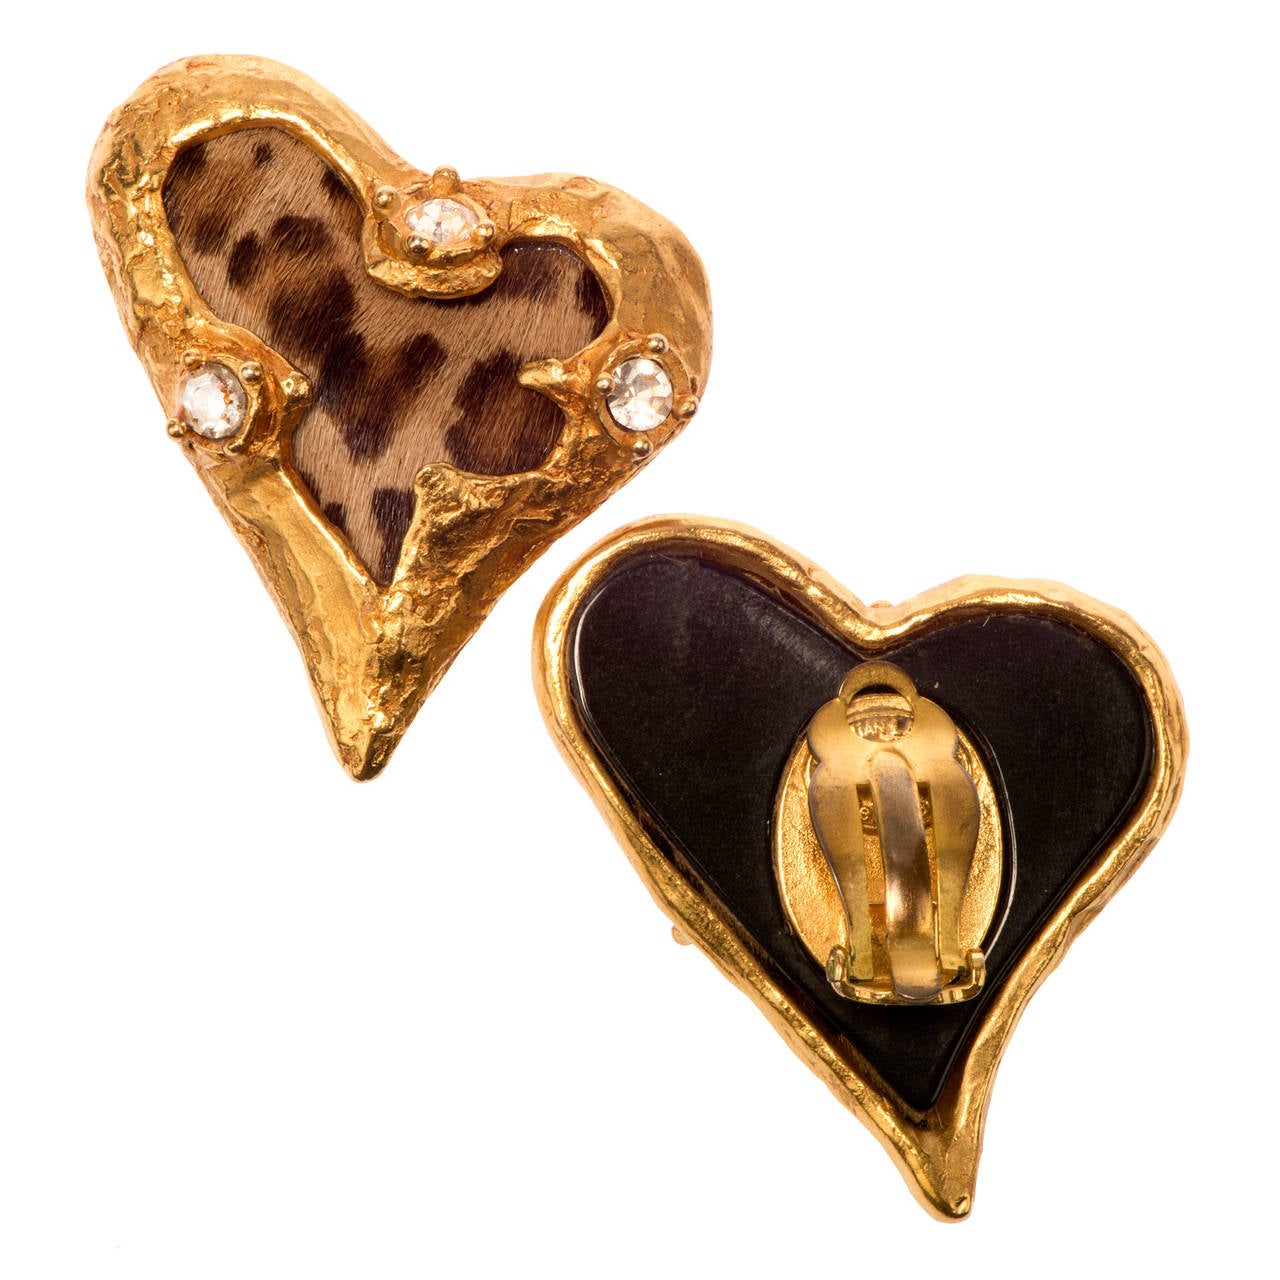 A sensational Pair of  Christian Lacroix, heart shaped, clip-on earrings. The textured gilt-metal frames, are inlaid with clear cut glass stones, which are inset with faux leopard fur. Stamped Christian Lacroix, made in France, centred with